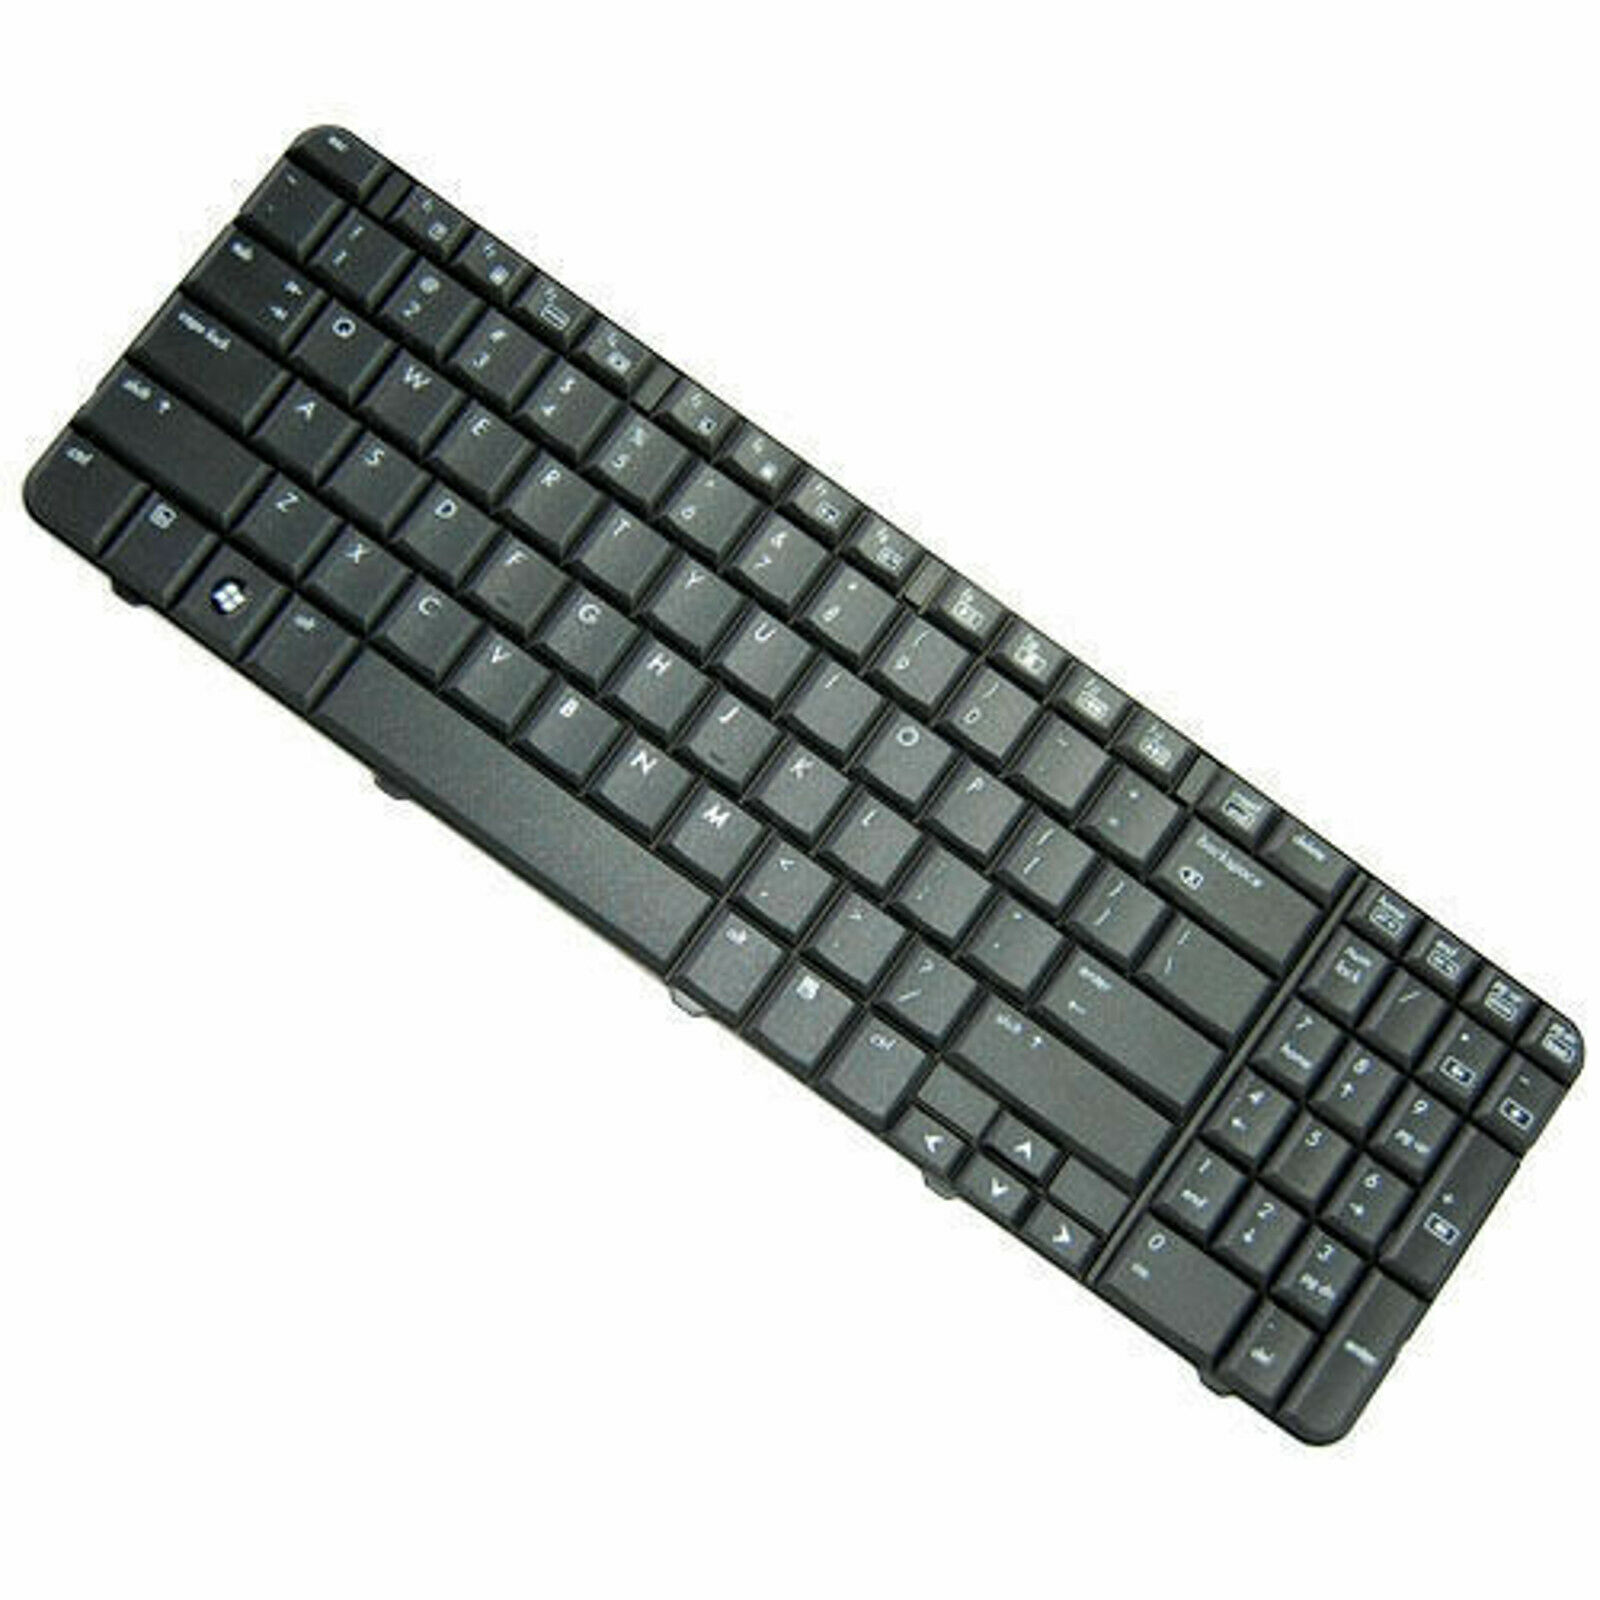 HQRP Laptop Keyboard Compatible with HP G60-533CL / G60-535DX / G60-536NR / G60-538CA Notebook - image 1 of 3